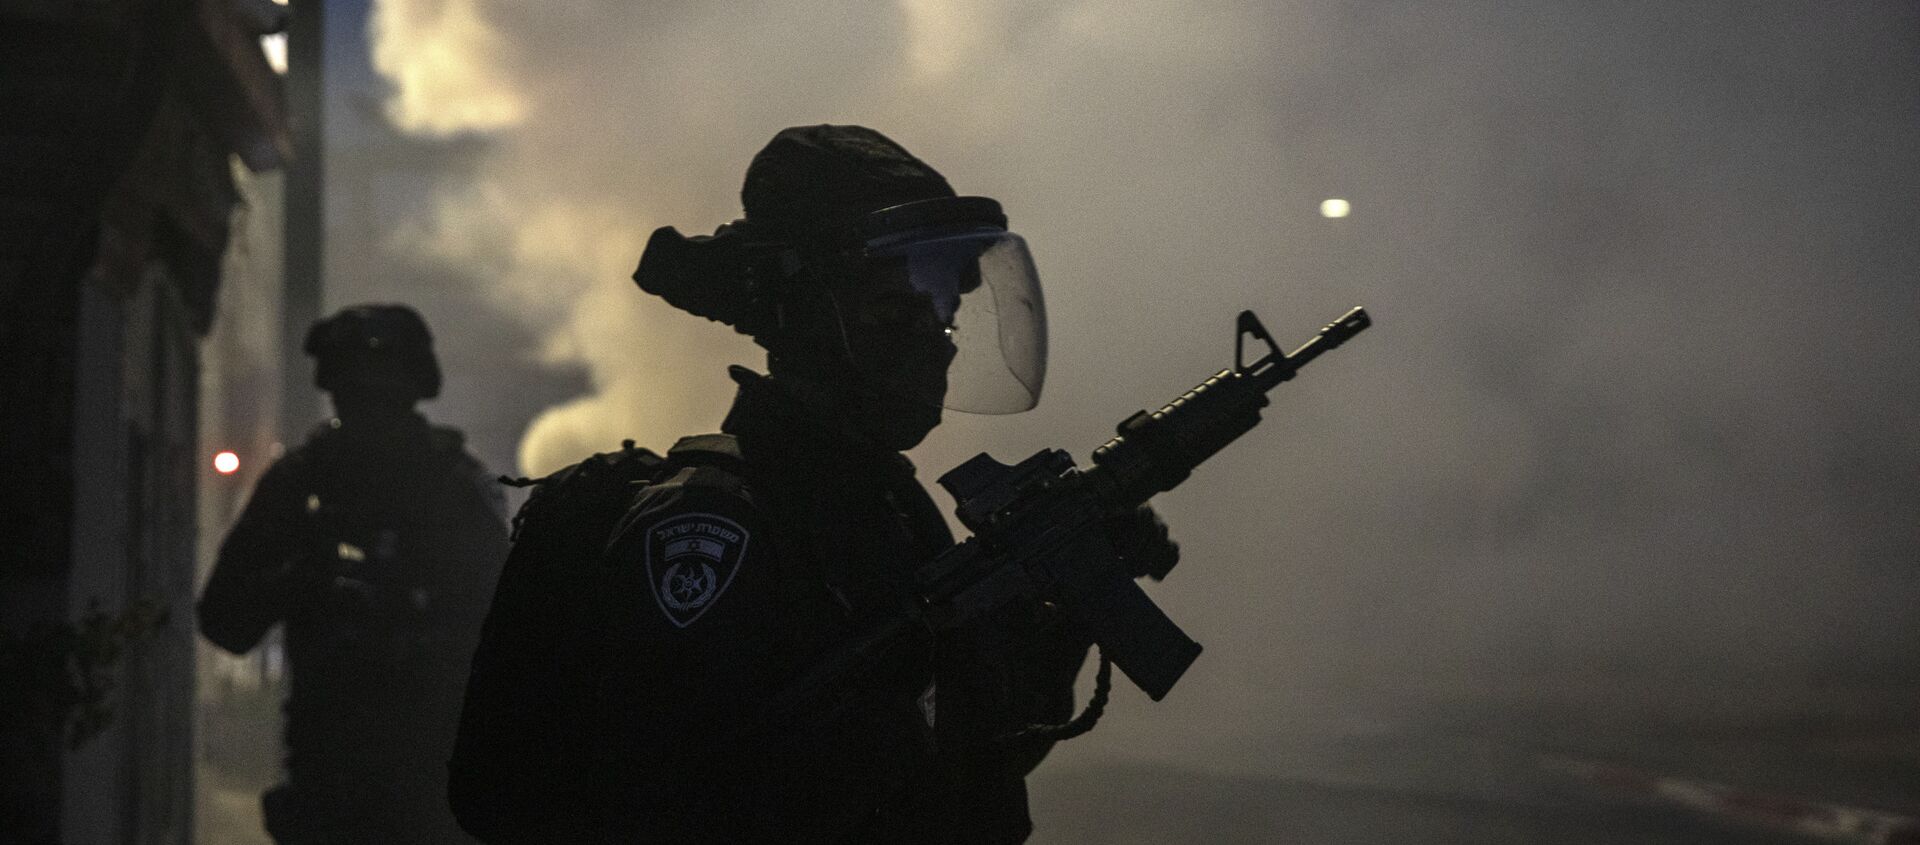 Israeli forces run during clashes with Israeli Arabs in the Israeli mixed city of Lod, Israel, Tuesday, May 11,2021. - Sputnik International, 1920, 11.05.2021